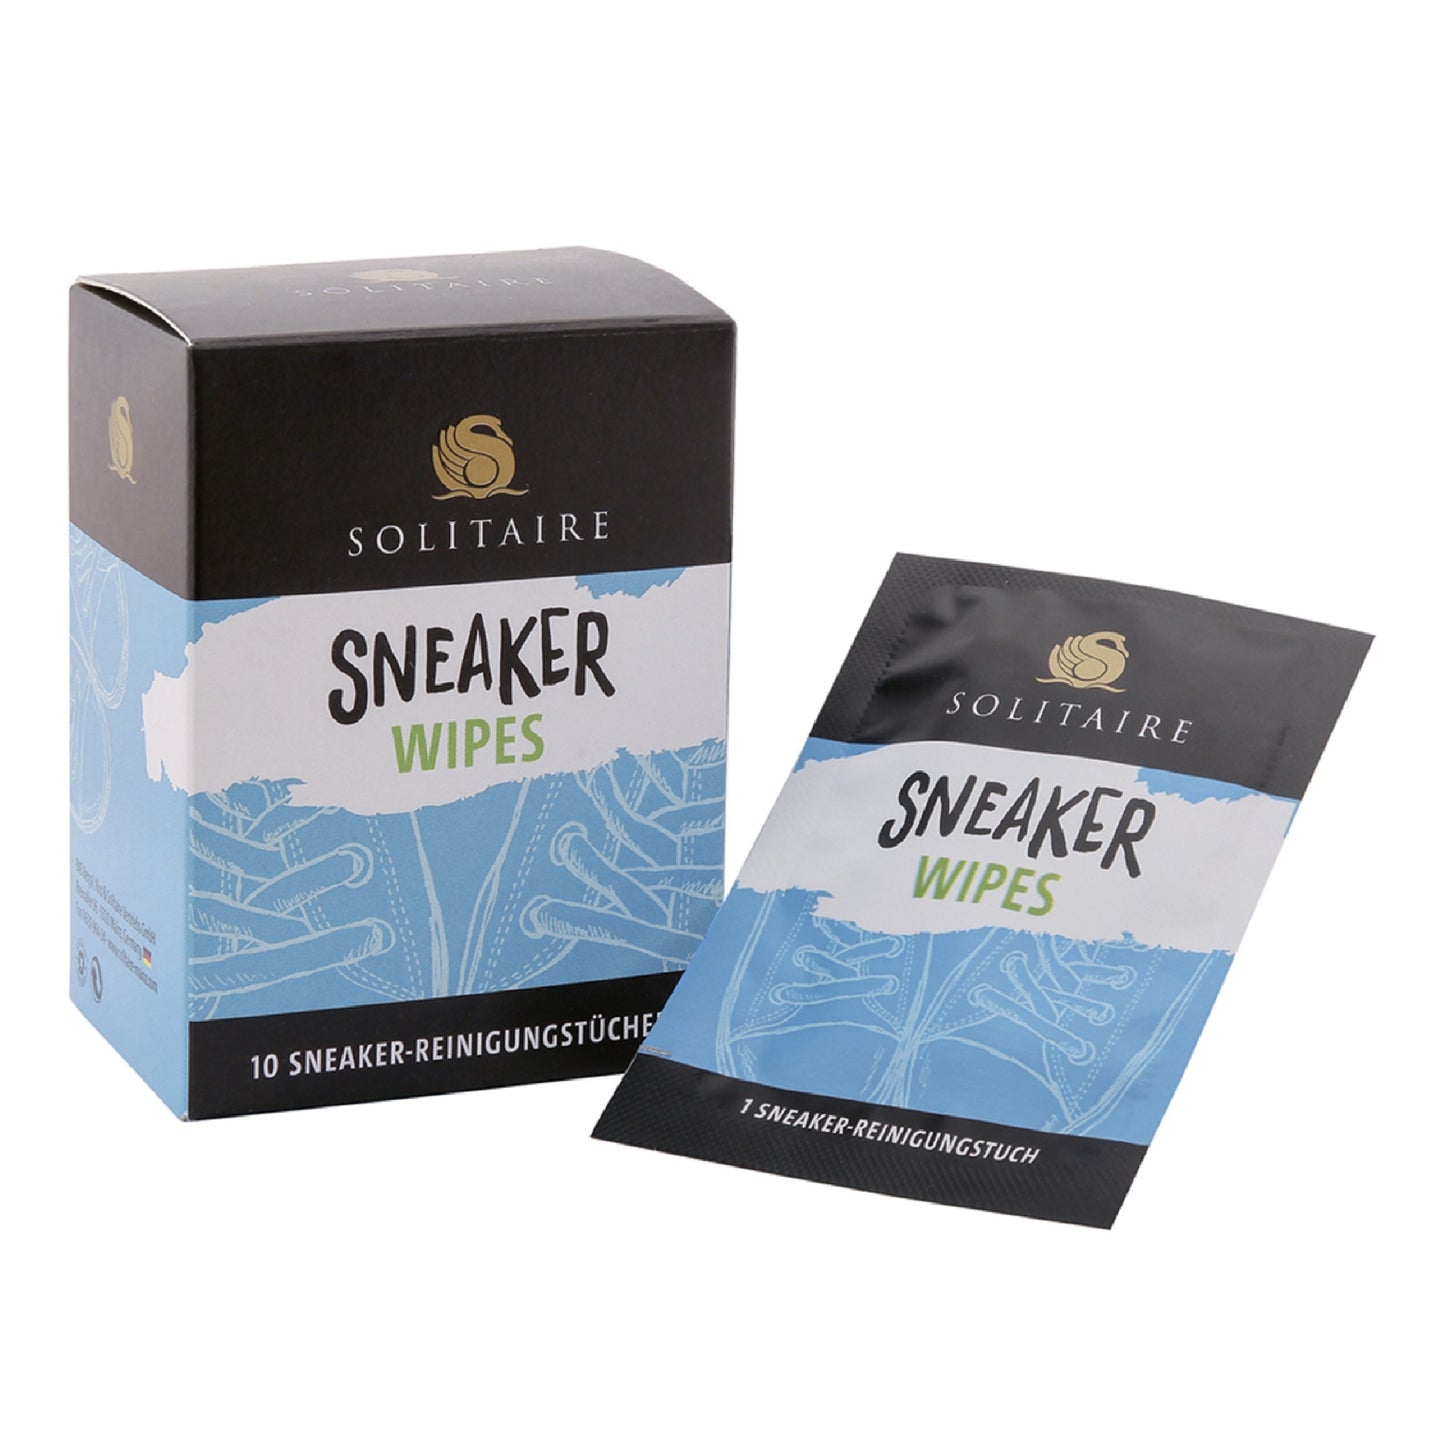 Solitaire Sneaker Wipes